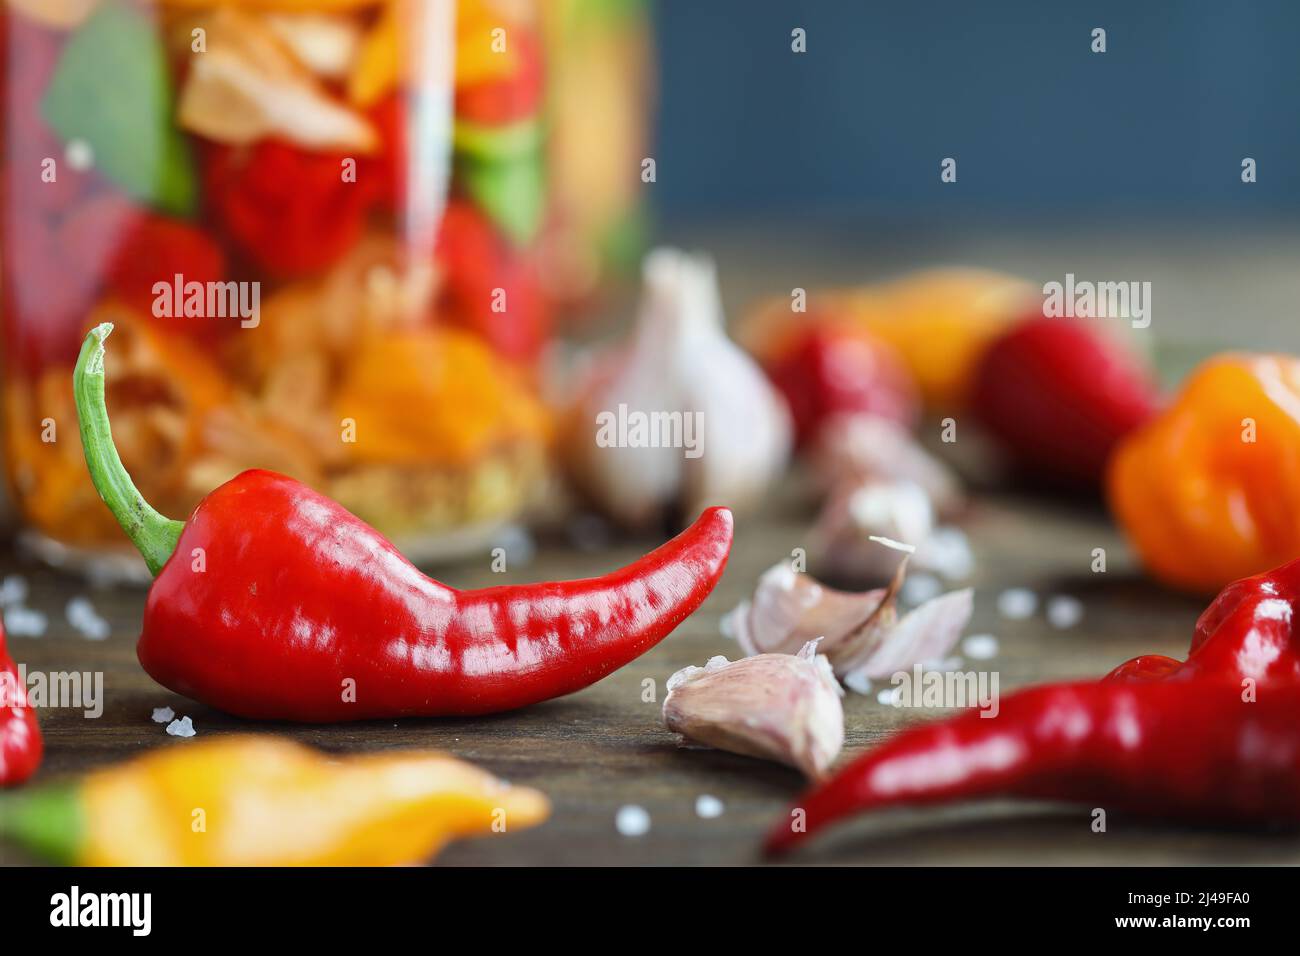 Cyklon pepper with variety of other spicy peppers and garlic cloves in front of a mason jar of fermenting hot sauce. Blurred background. Stock Photo